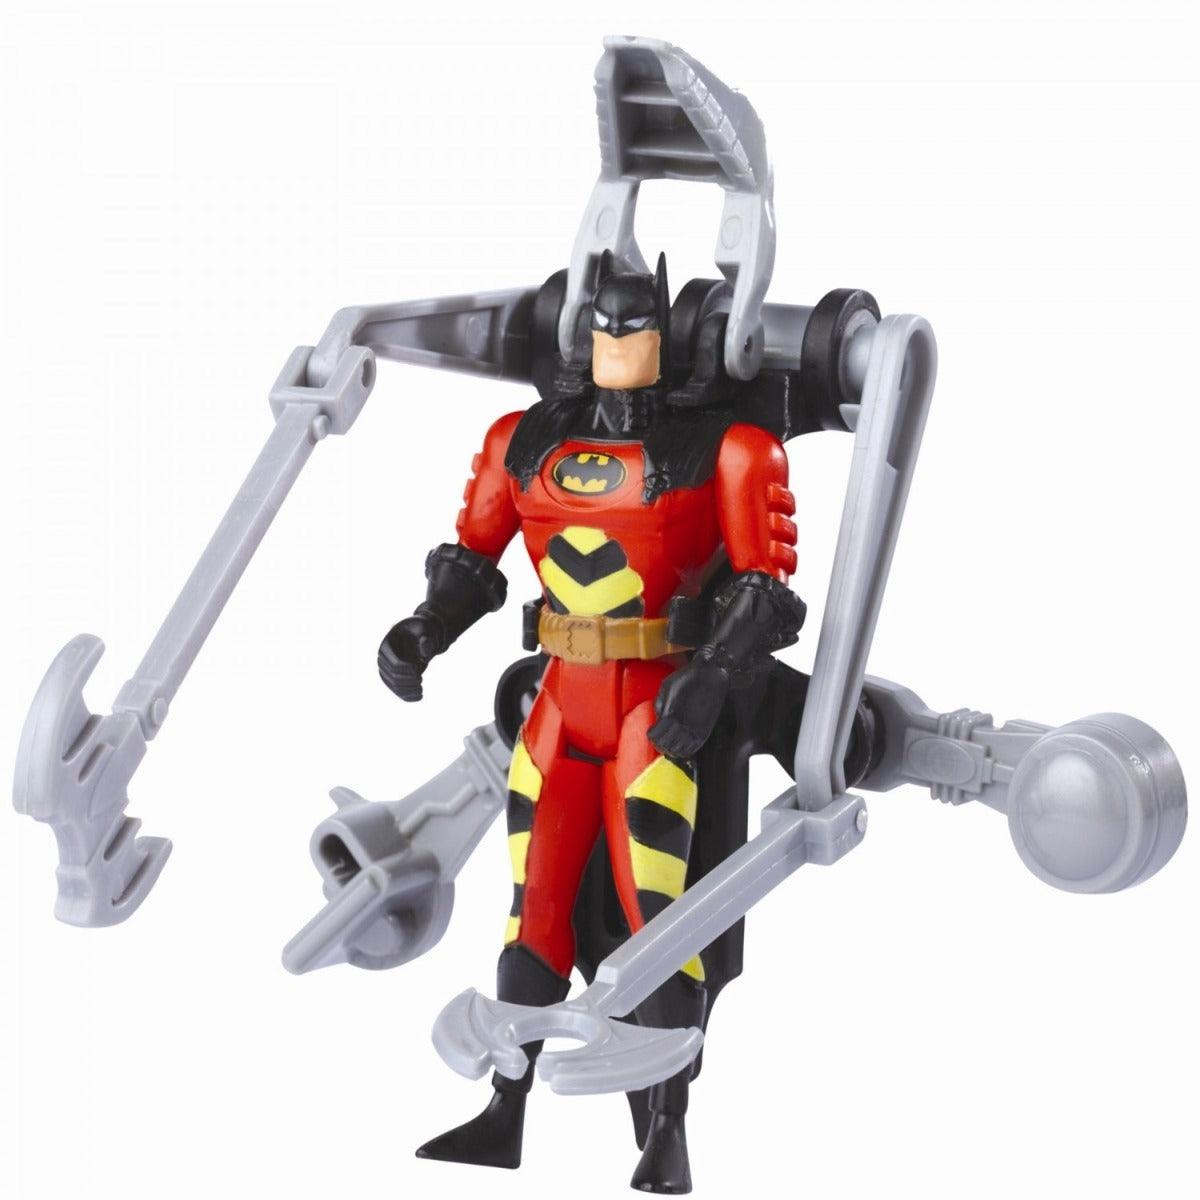 Funskool Disaster Control Batman Action Figurine for Ages 4+ (Card & Design May Vary)